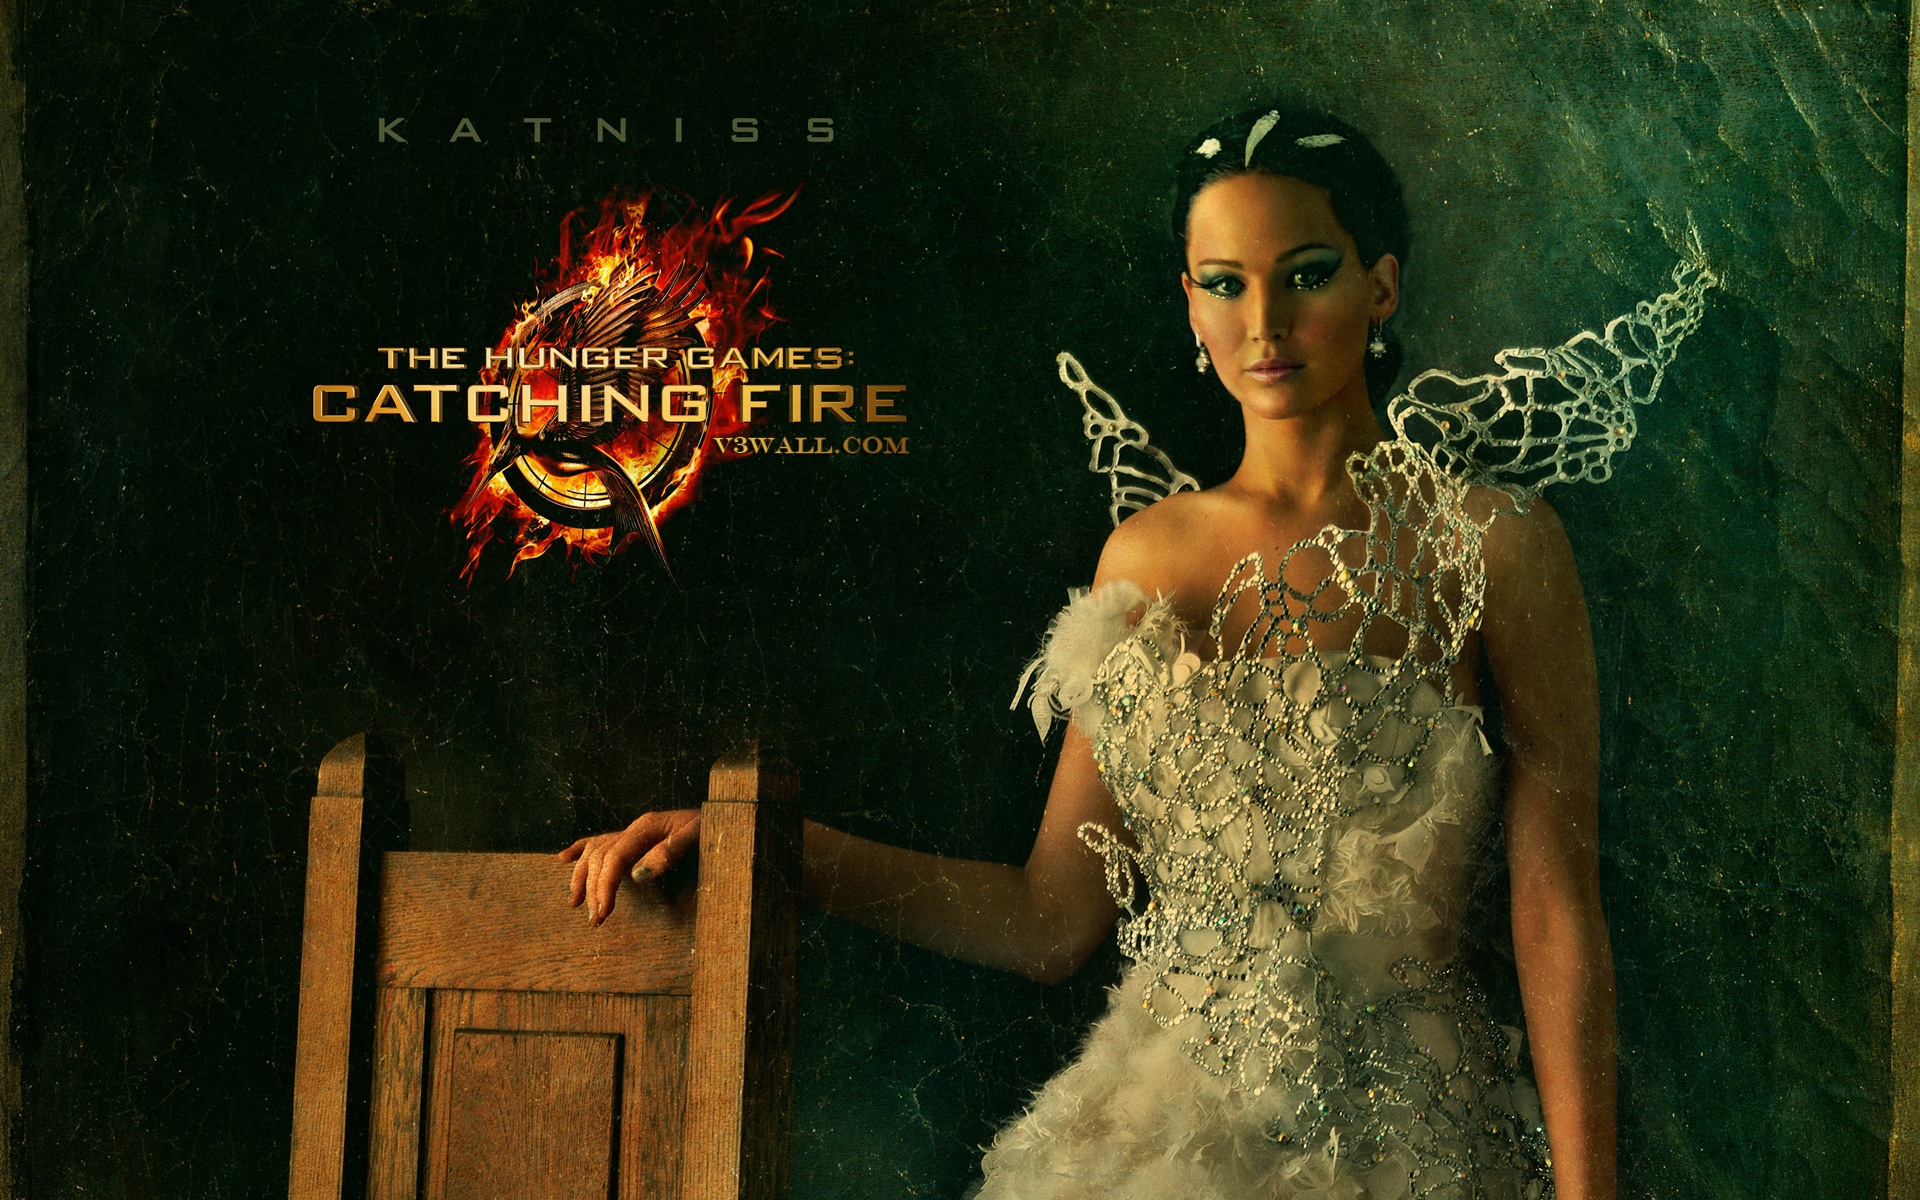 The Hunger Games: Catching Fire wallpapers HD #13 - 1920x1200